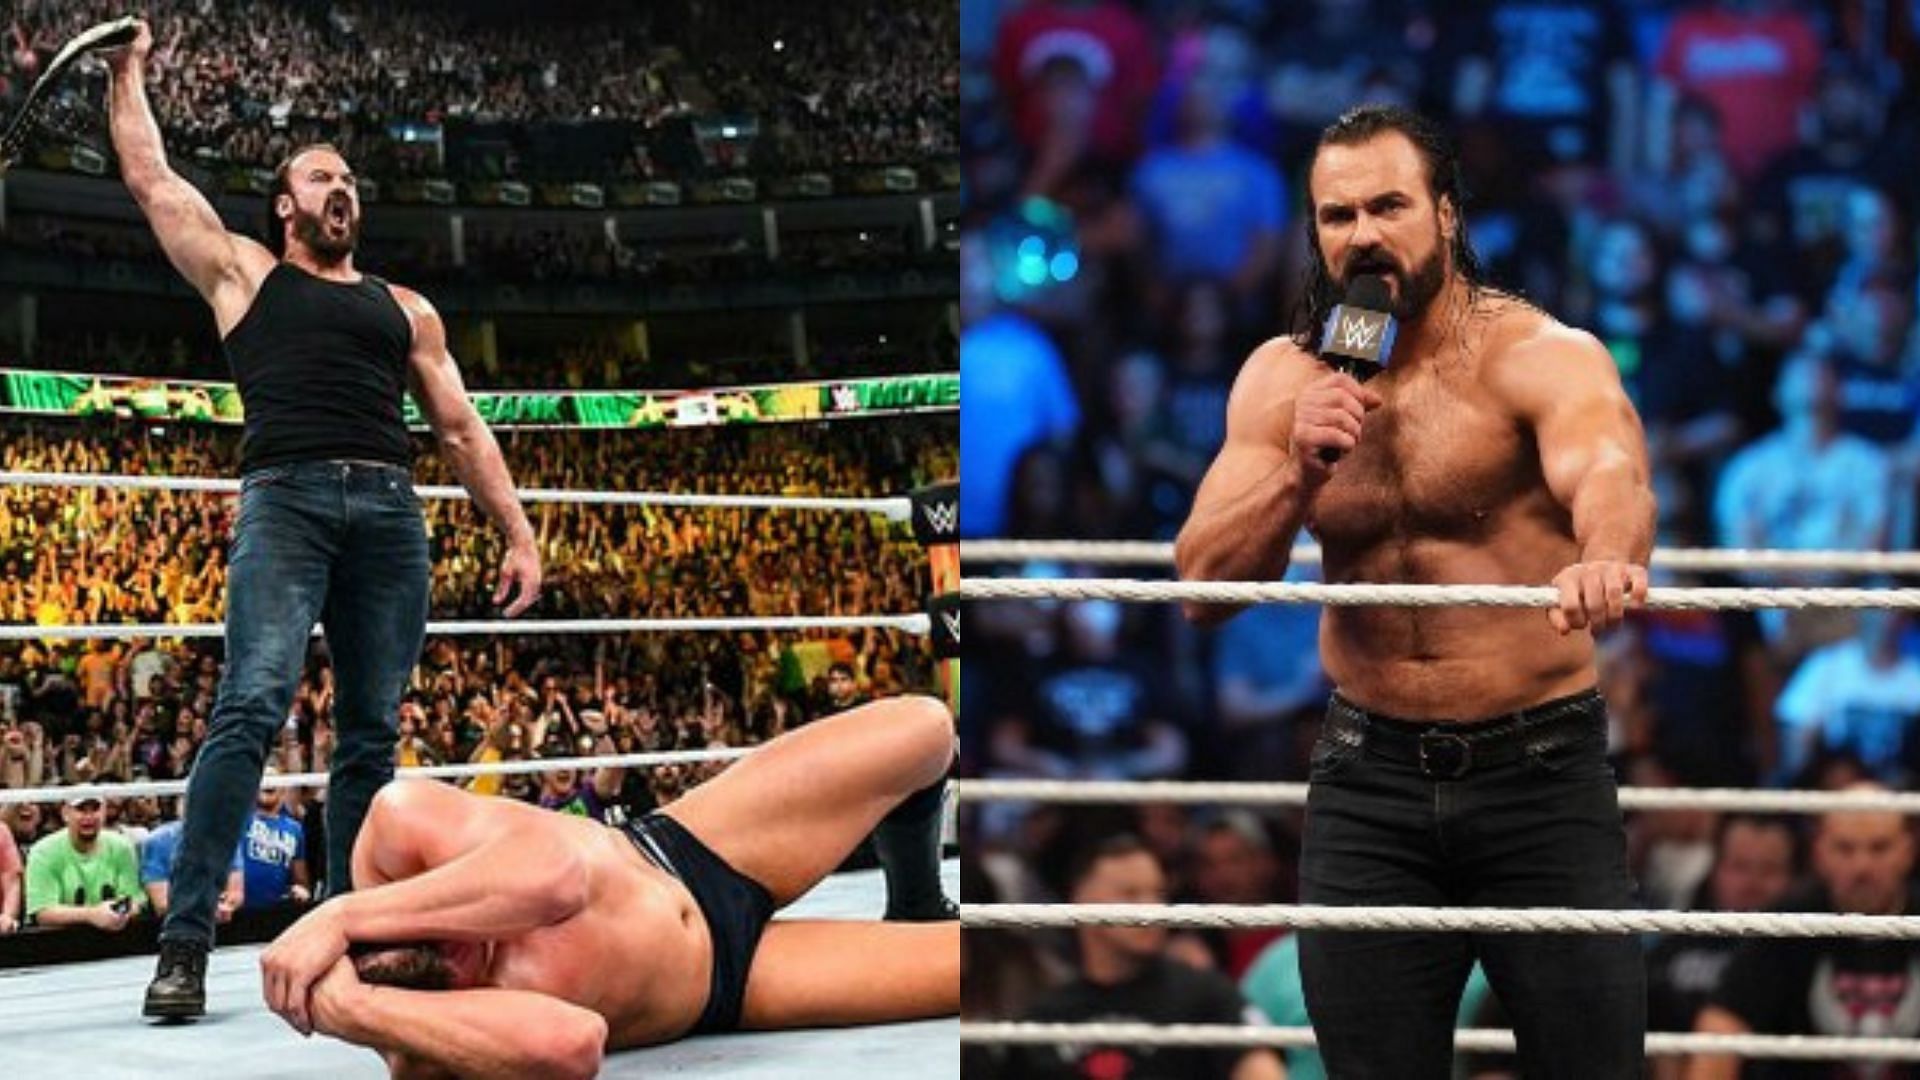 Drew McIntyre will challenge for the Intercontinental Title at SummerSlam